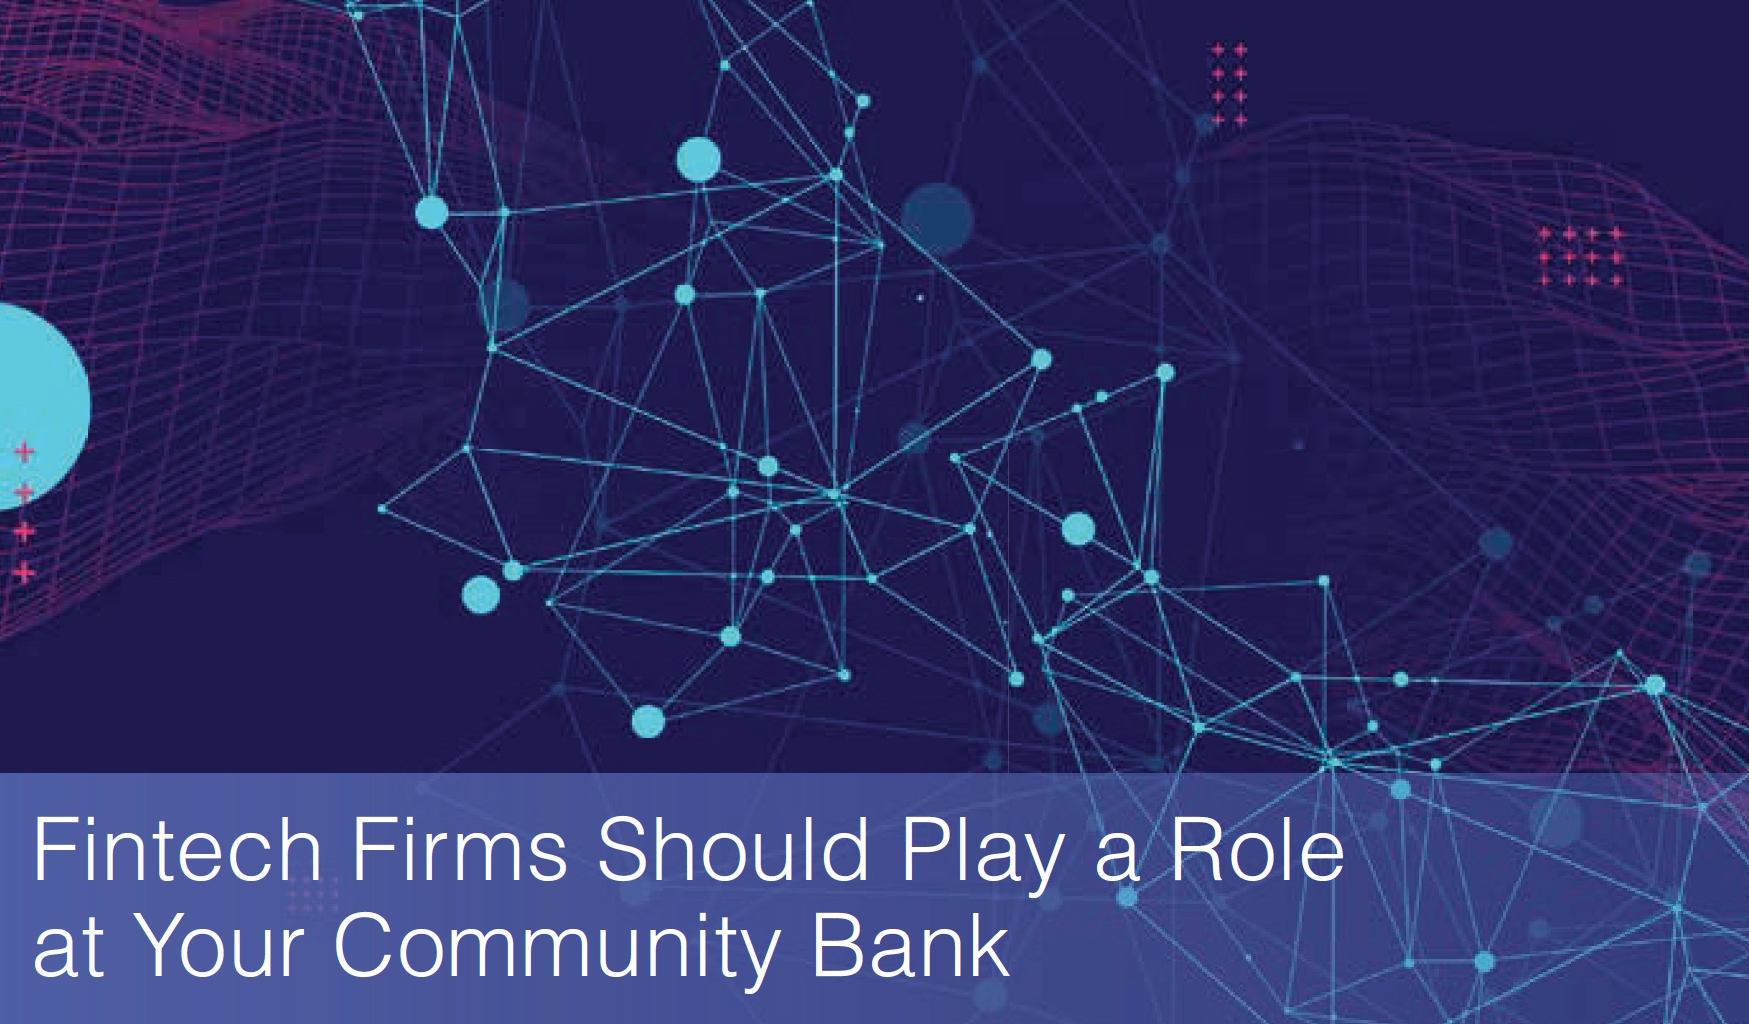 Fintech Firms Should Play a Role at Your Community Bank